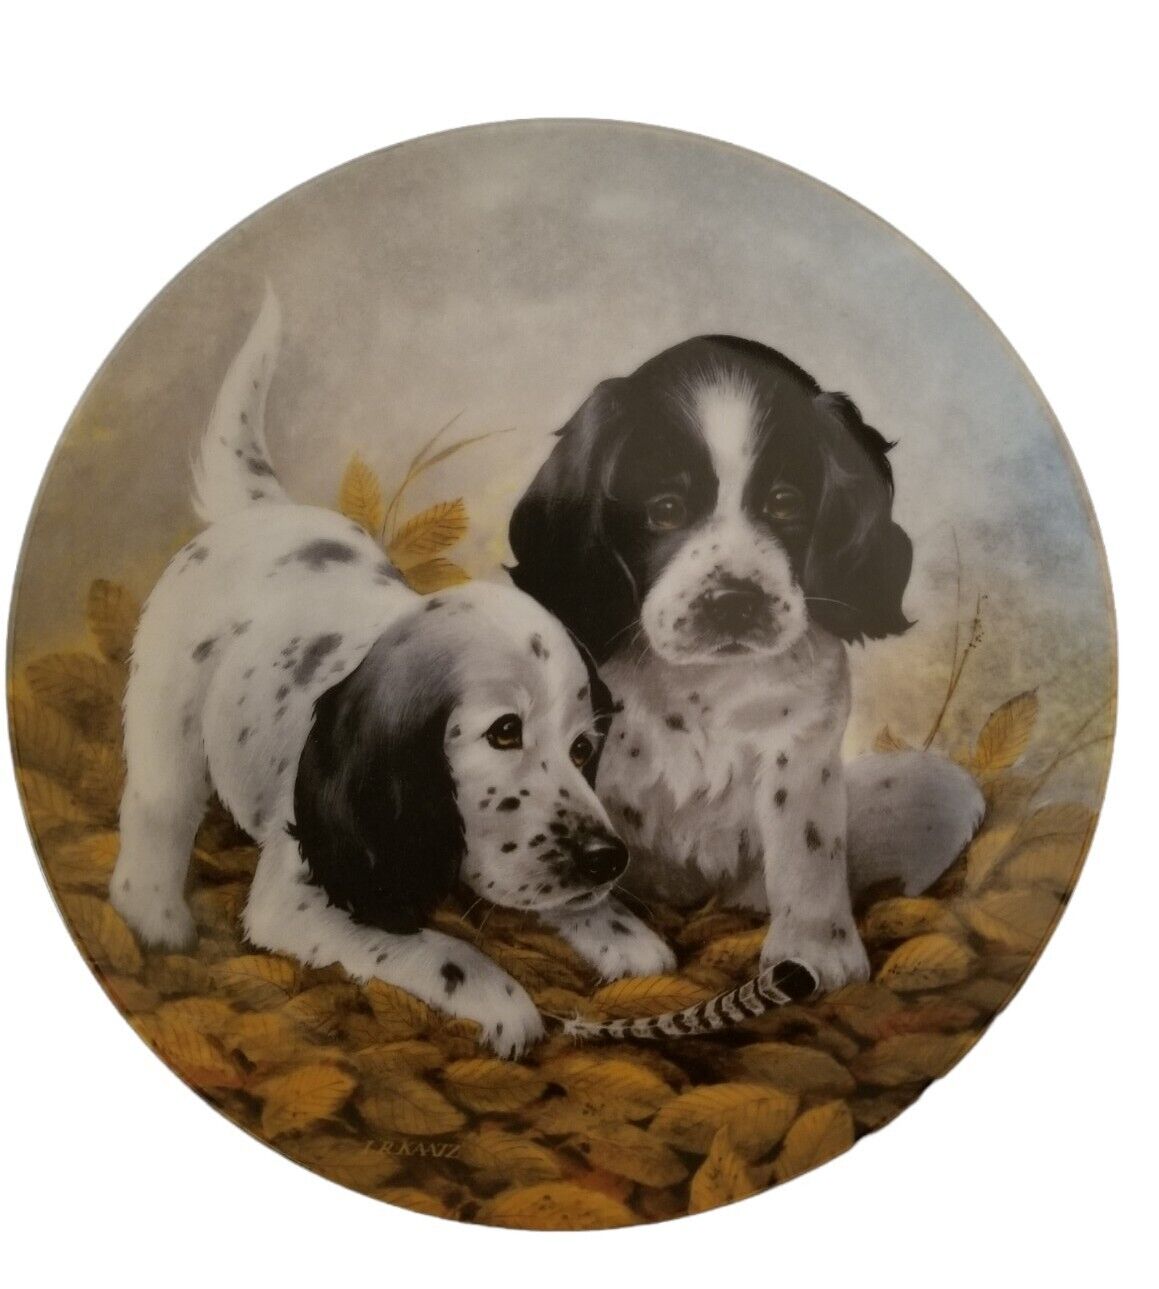 1989 Vintage English Setters Plate Limited Edition Hunting Knowles Puppy